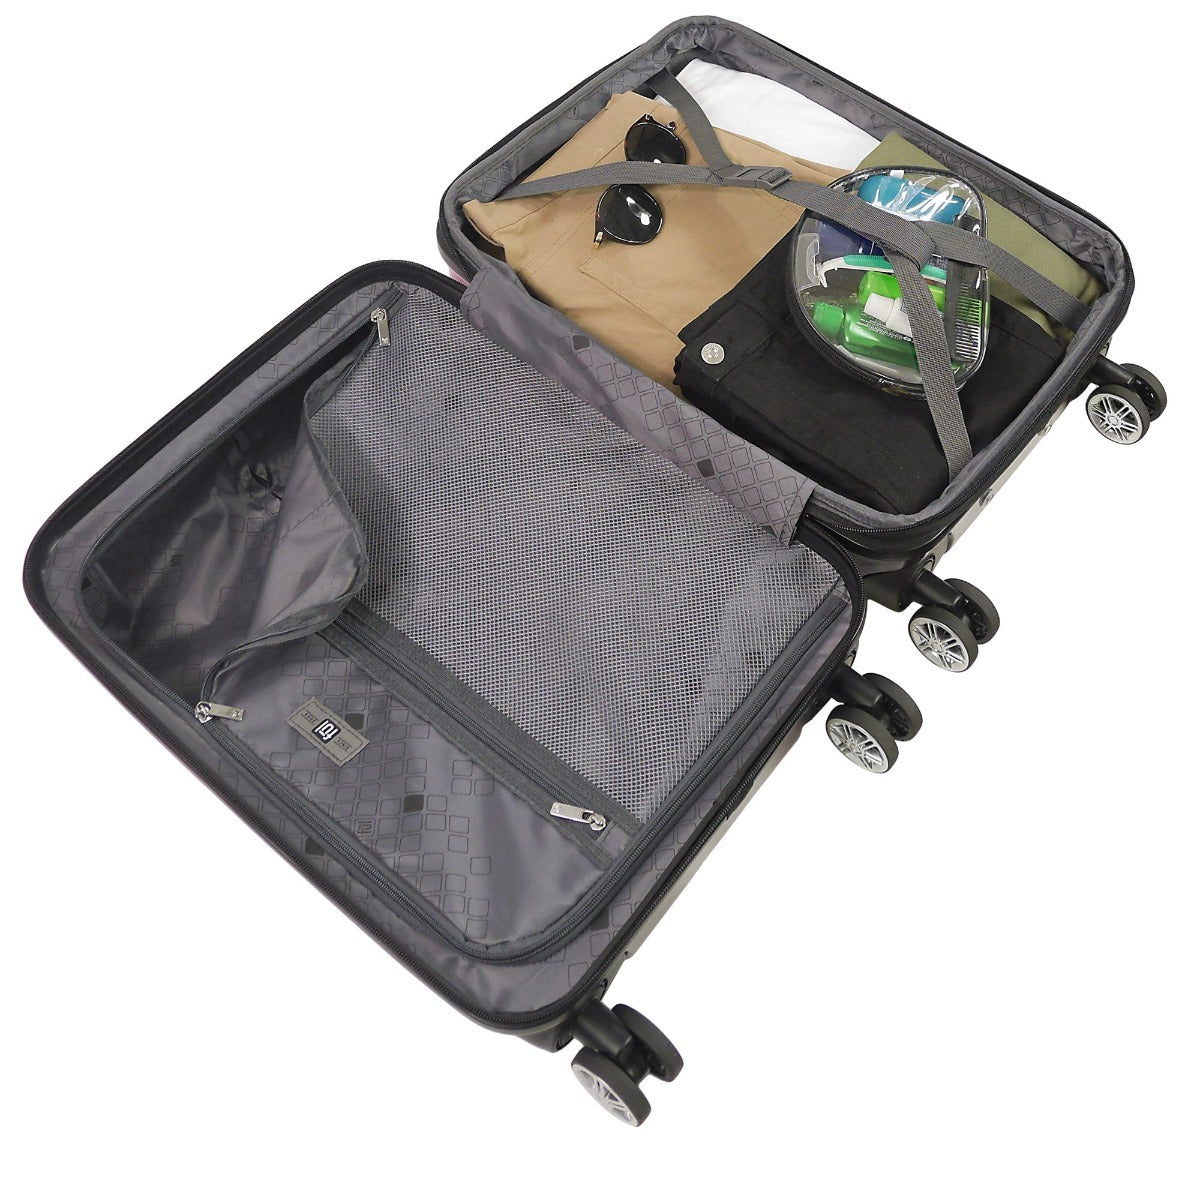 Ful spinner suitcase with compression straps & interior organizing zip sections